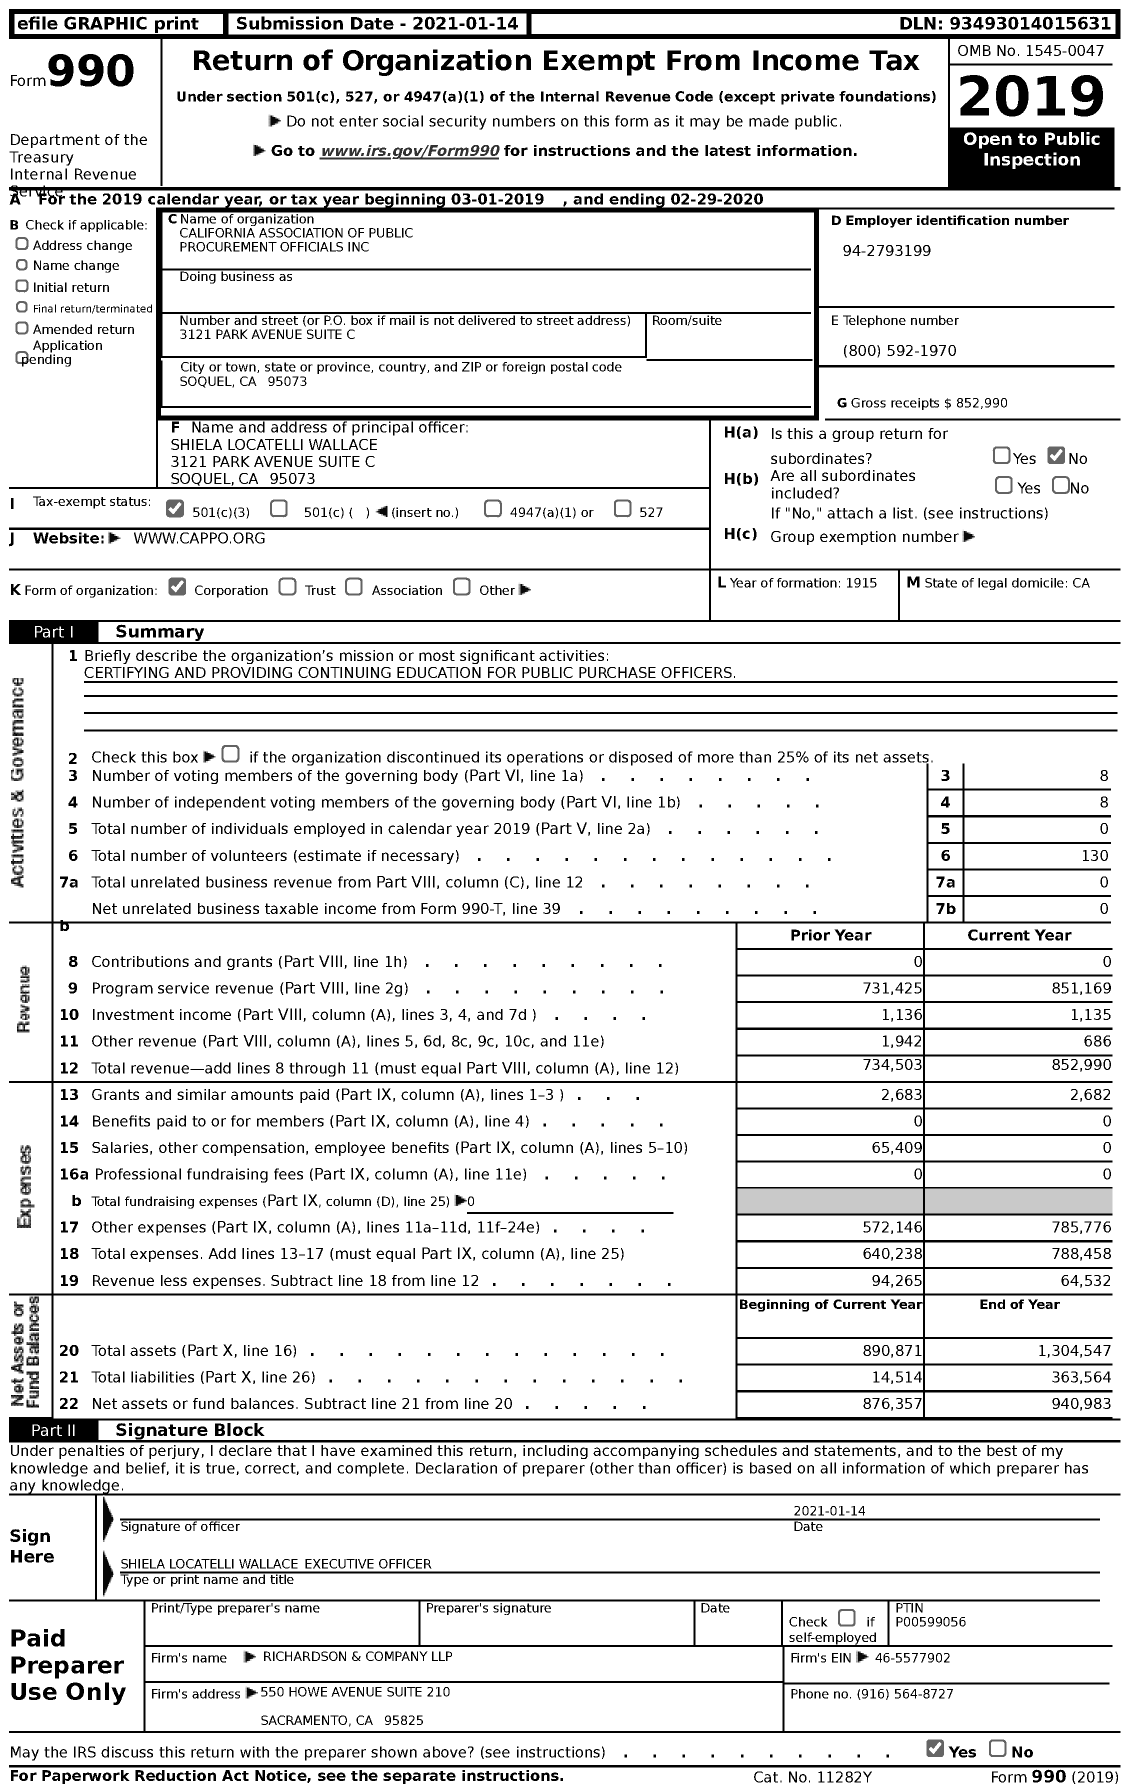 Image of first page of 2019 Form 990 for California Association of Public Procurement Officials